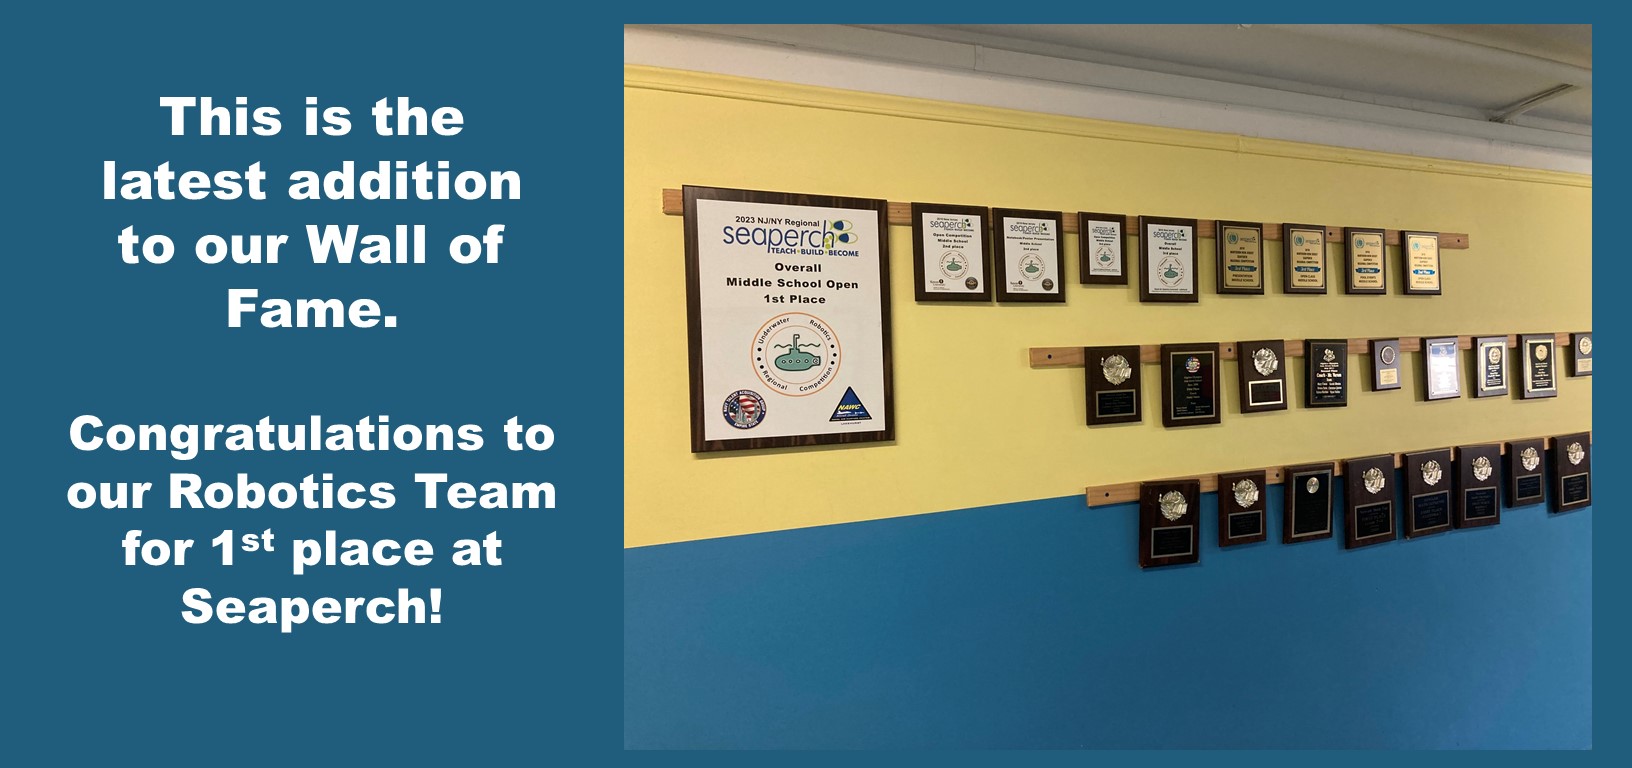 This is the latest addition to our Wall of Fame. Congratulations to our Robotics Team for 1st place at Seaperch!